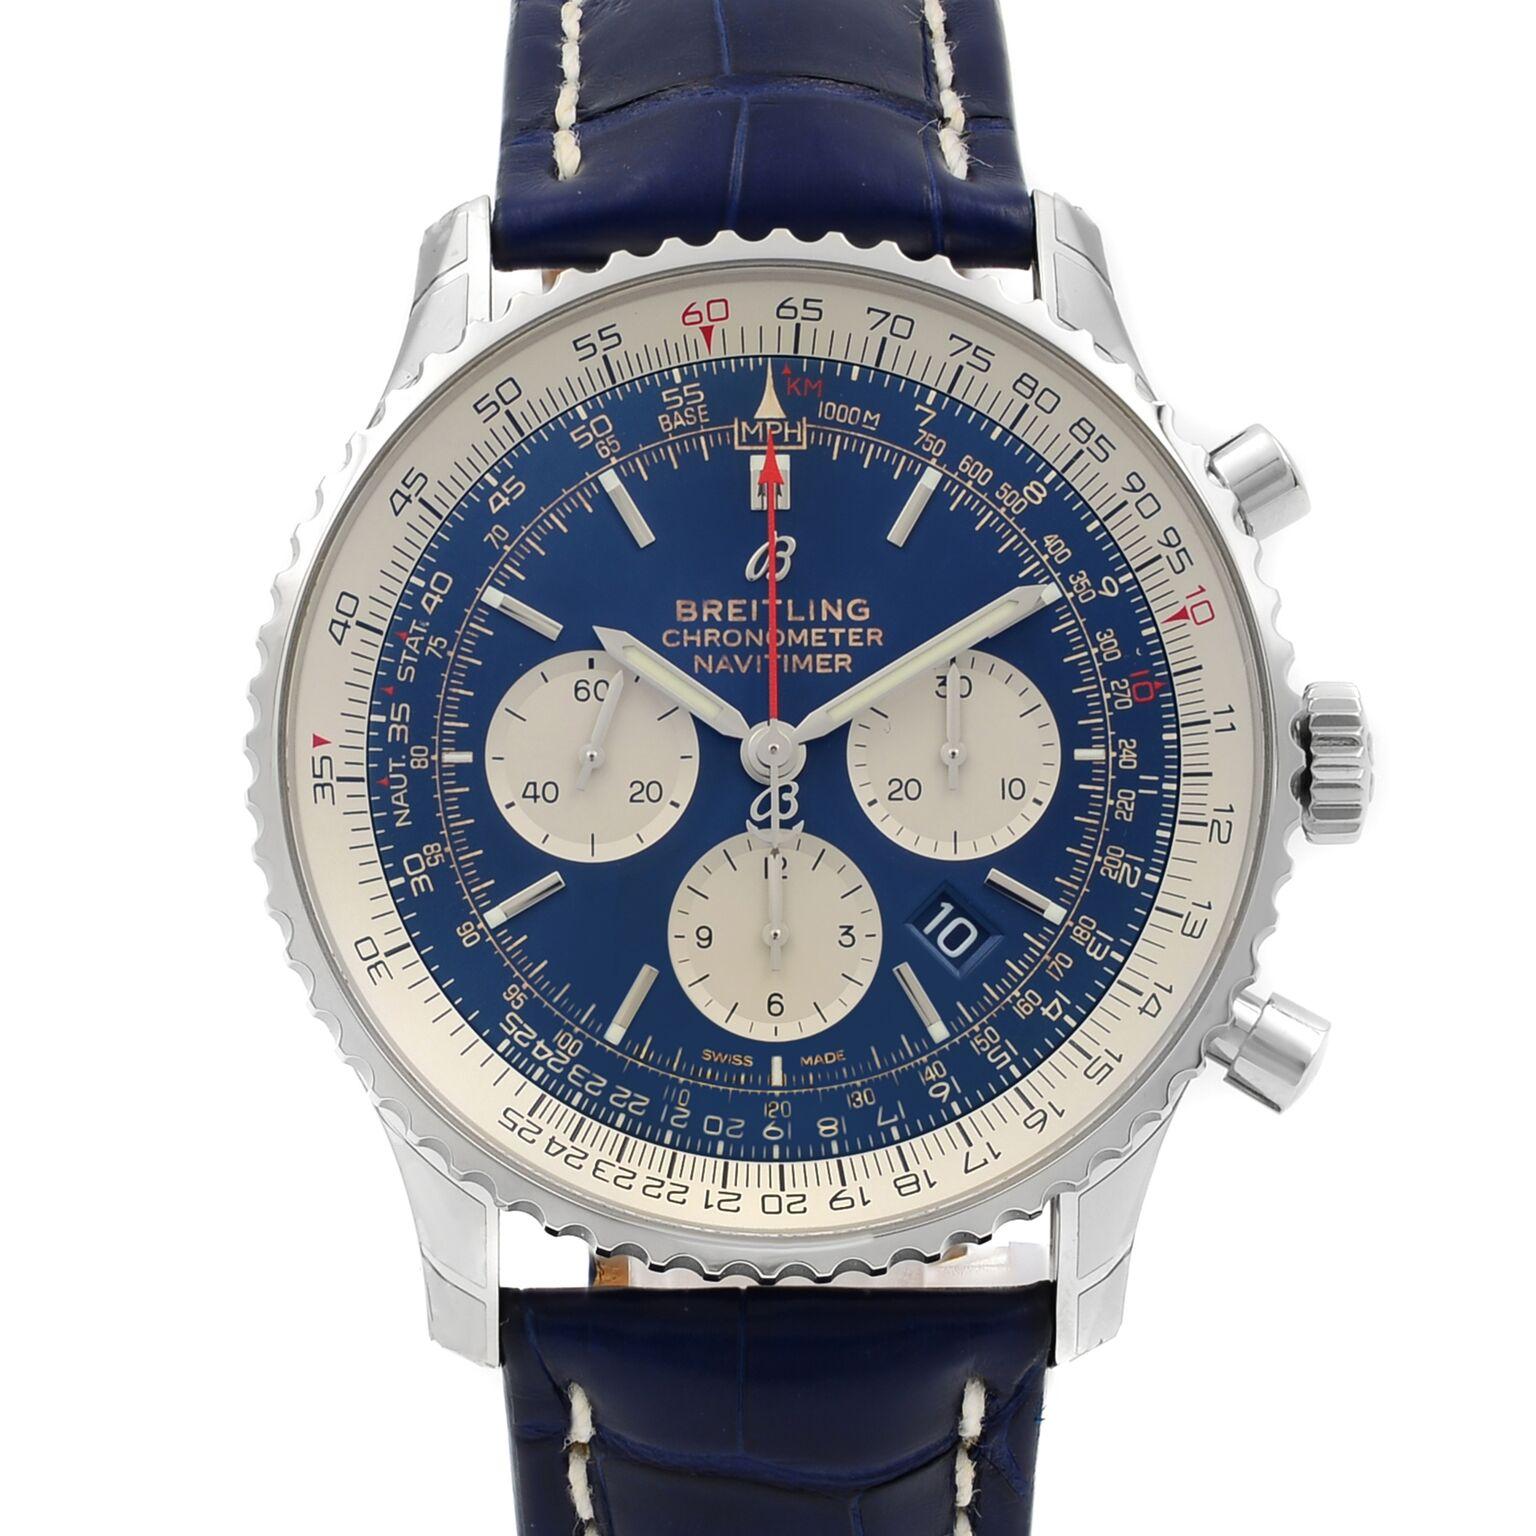 This New Without Tags Breitling Navitimer 1  AB0127211C1P2  is a beautiful men's timepiece that is powered by mechanical (automatic) movement which is cased in a stainless steel case. It has a round shape face, chronograph, date indicator, small